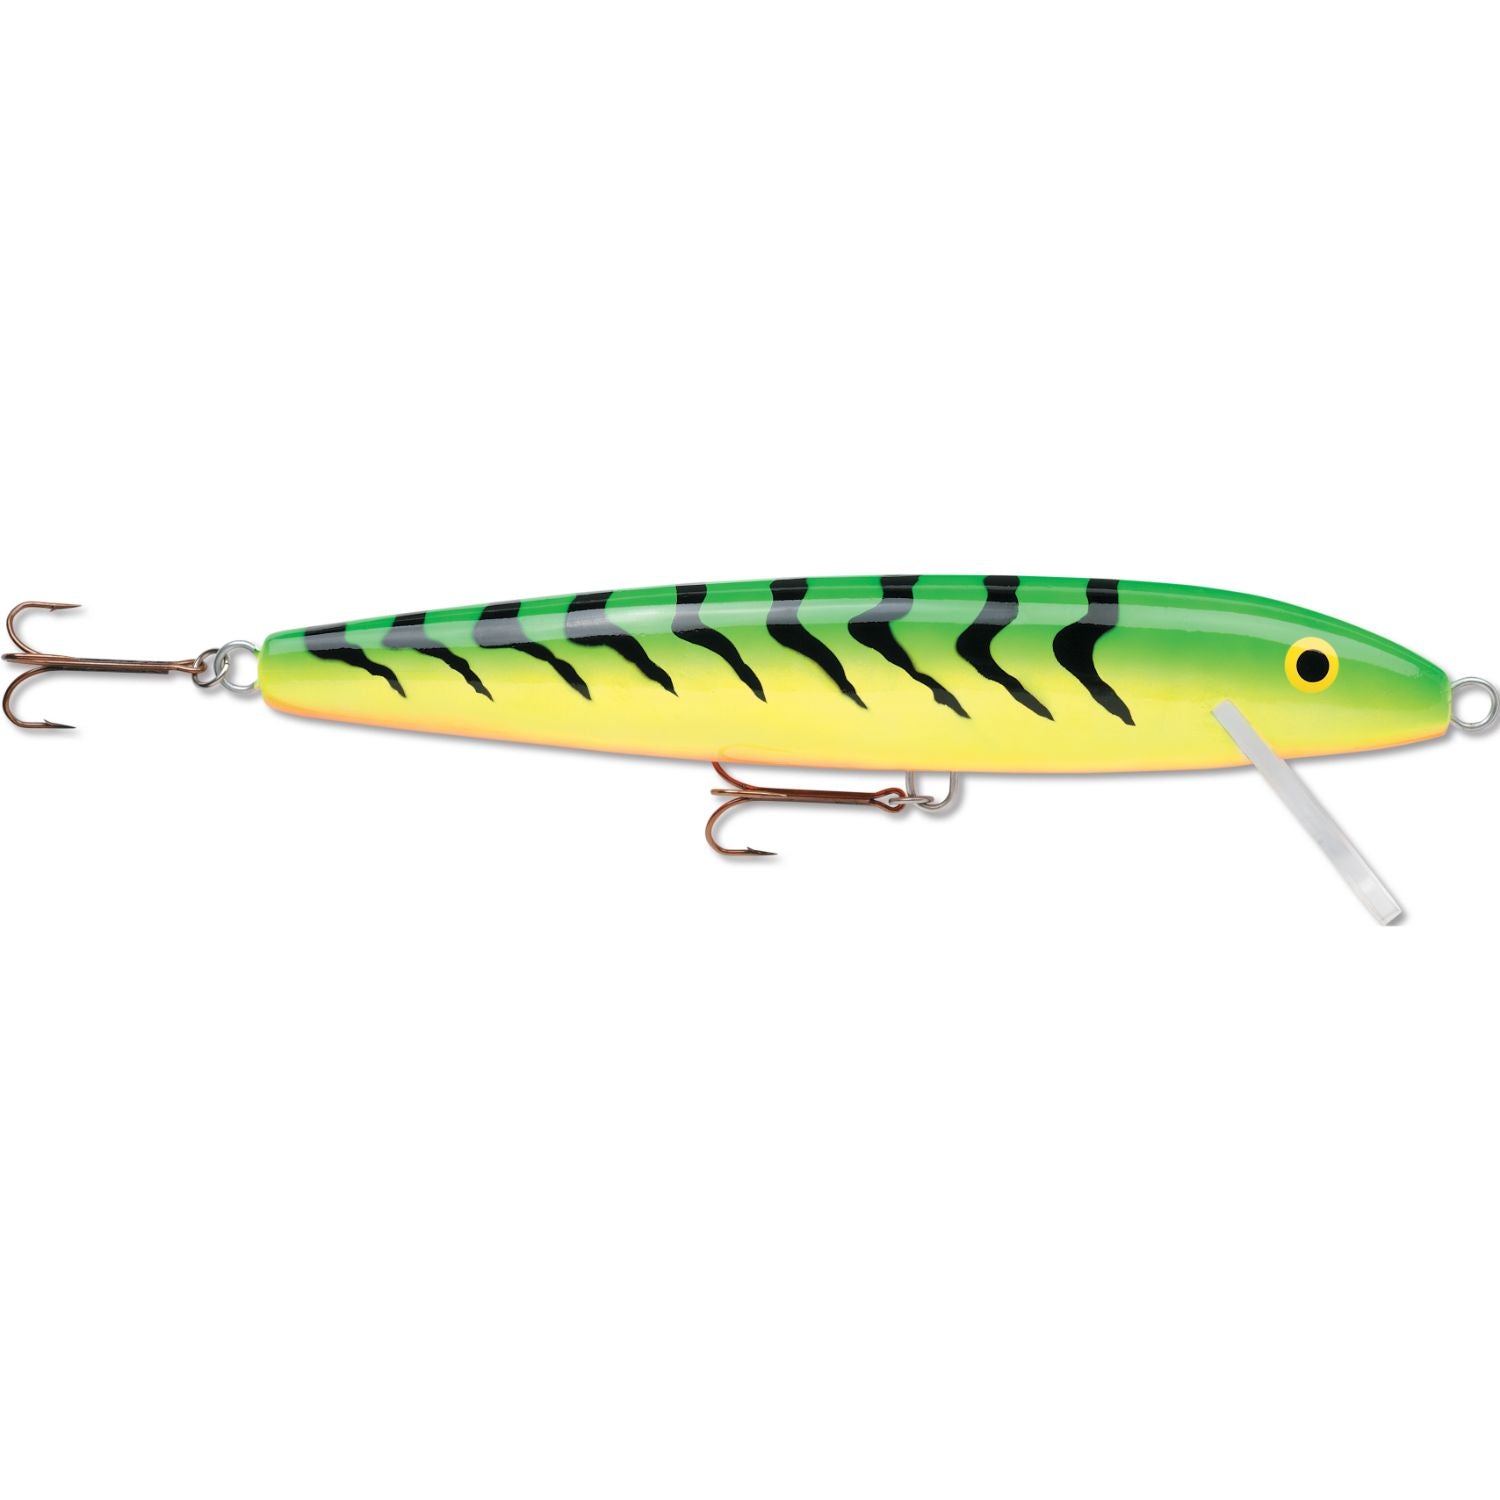 130mm 5.25inch Yo-Zuri 3D Inshore Twitchbait Ghost Shad Lures from Fish On  Outlet